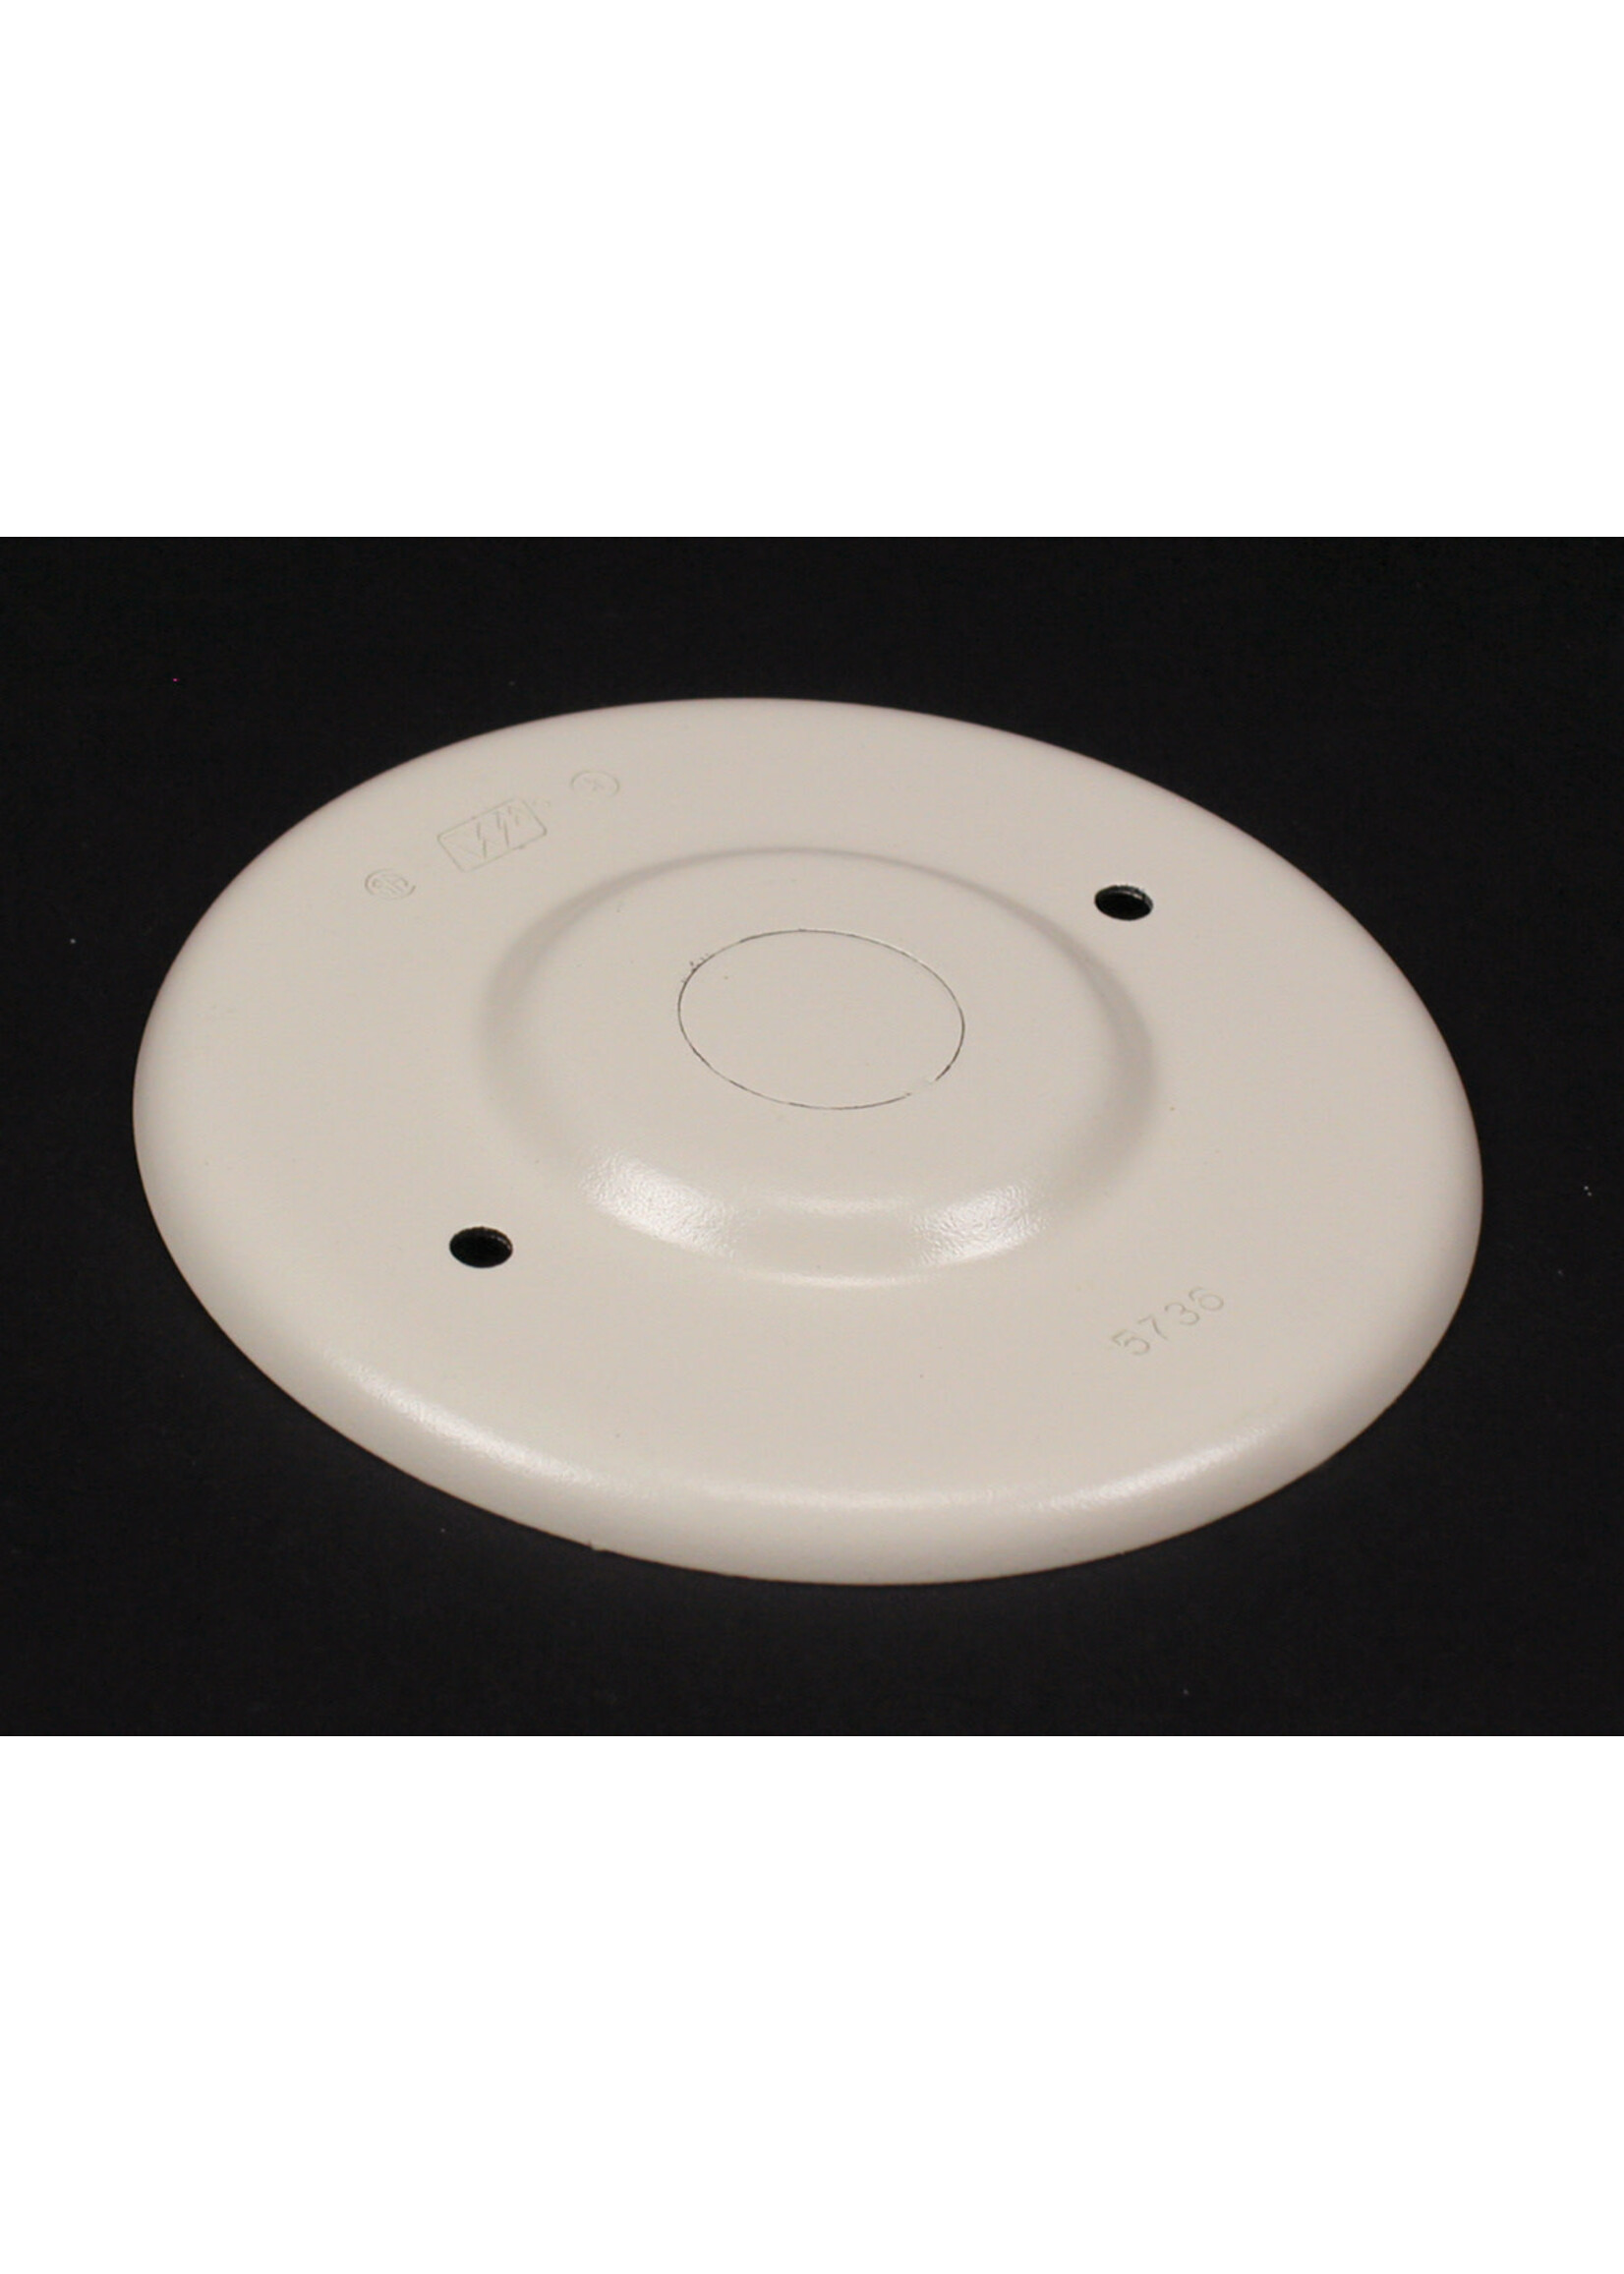 WIREMOLD 15-V5736 BLANK COVER WITH ½” K.O. ON CENTER